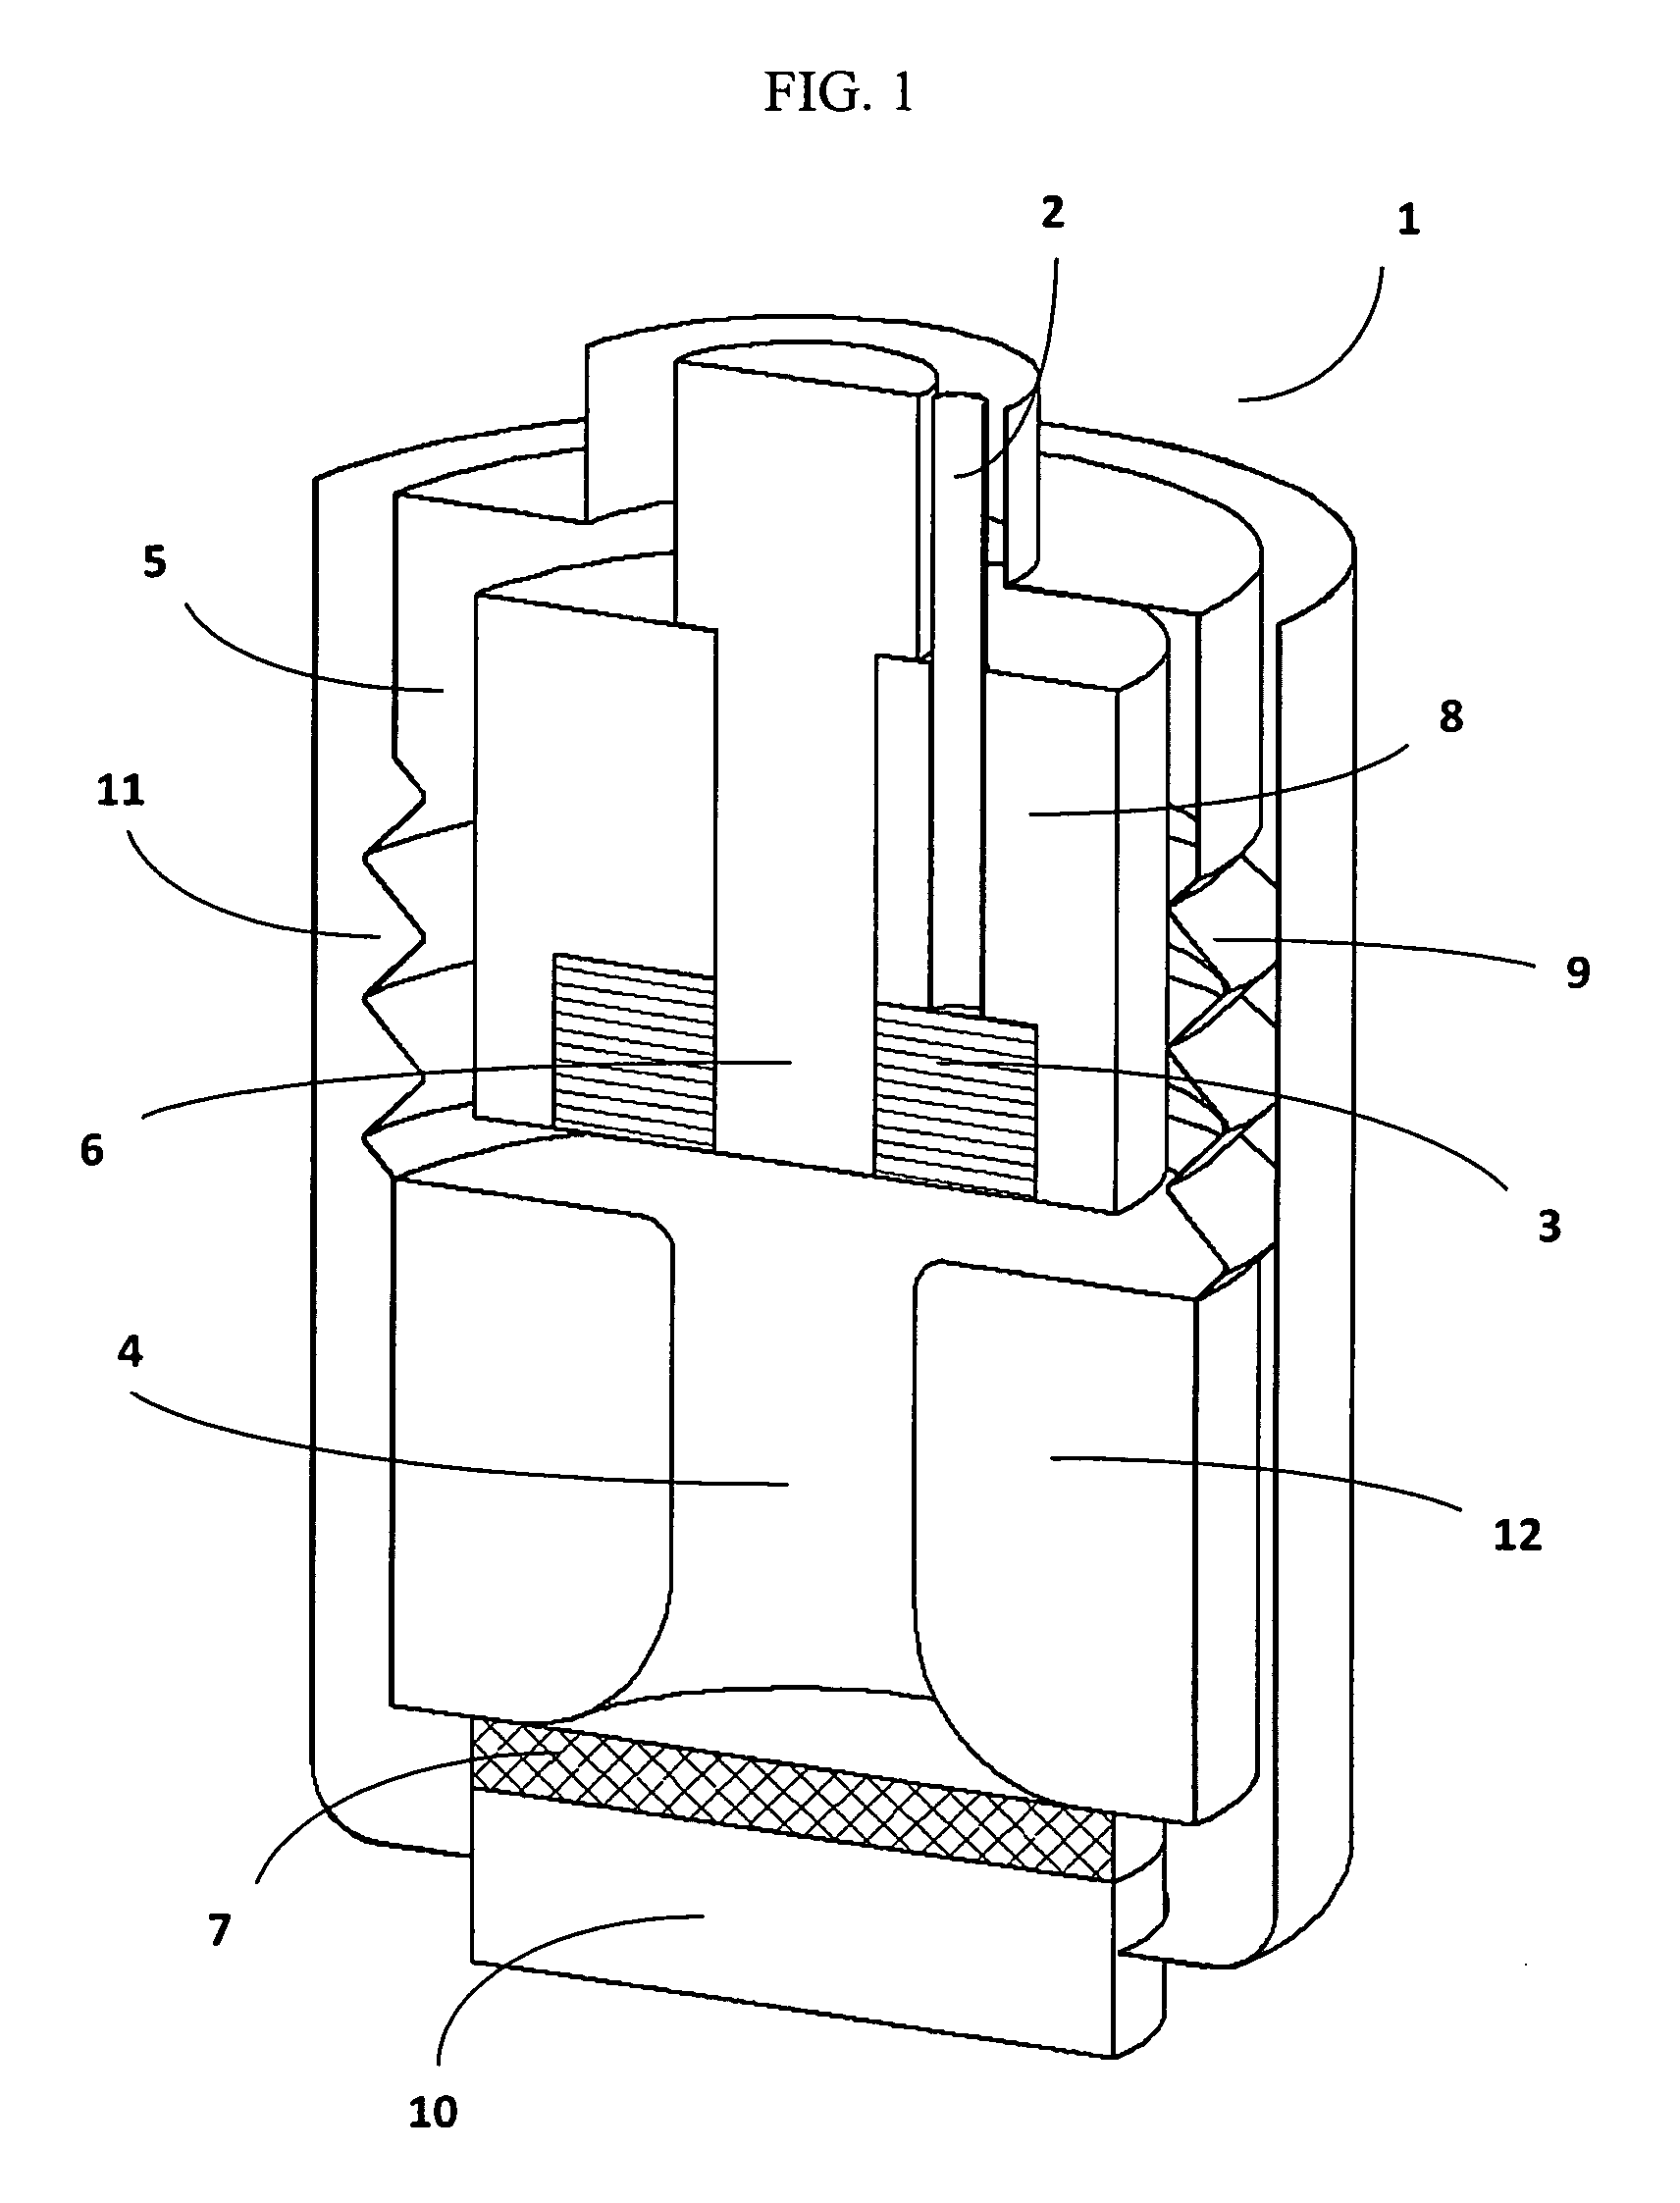 Apparatus and method for vaporizing a liquid fuel